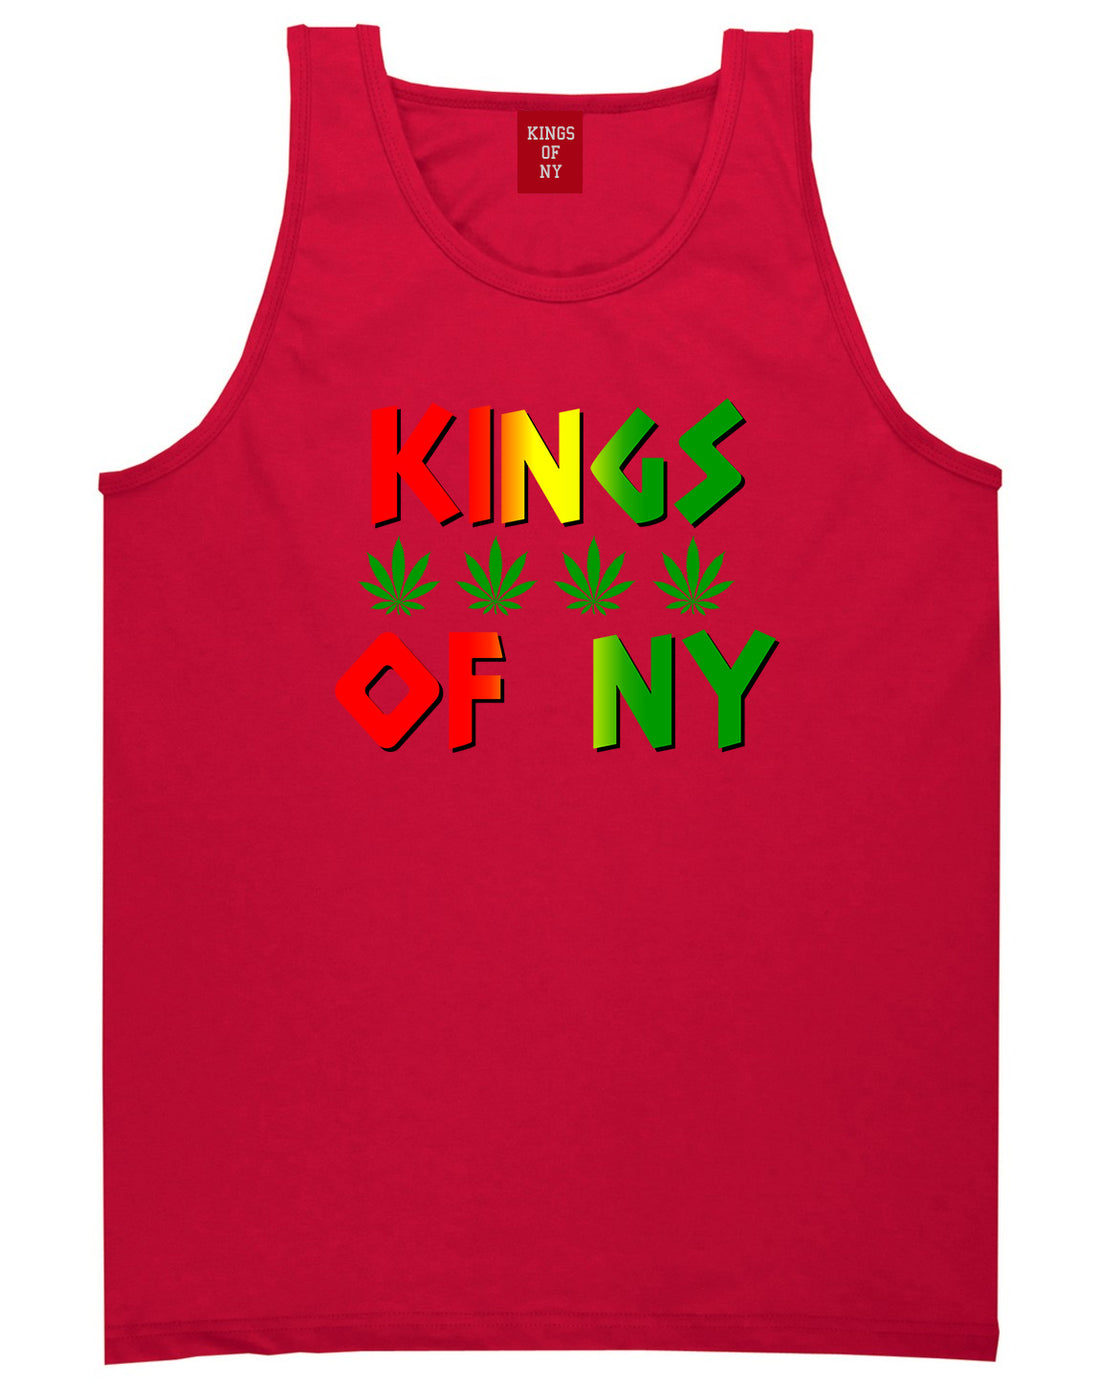 Puff Puff Pass Mens Tank Top Shirt Red by Kings Of NY